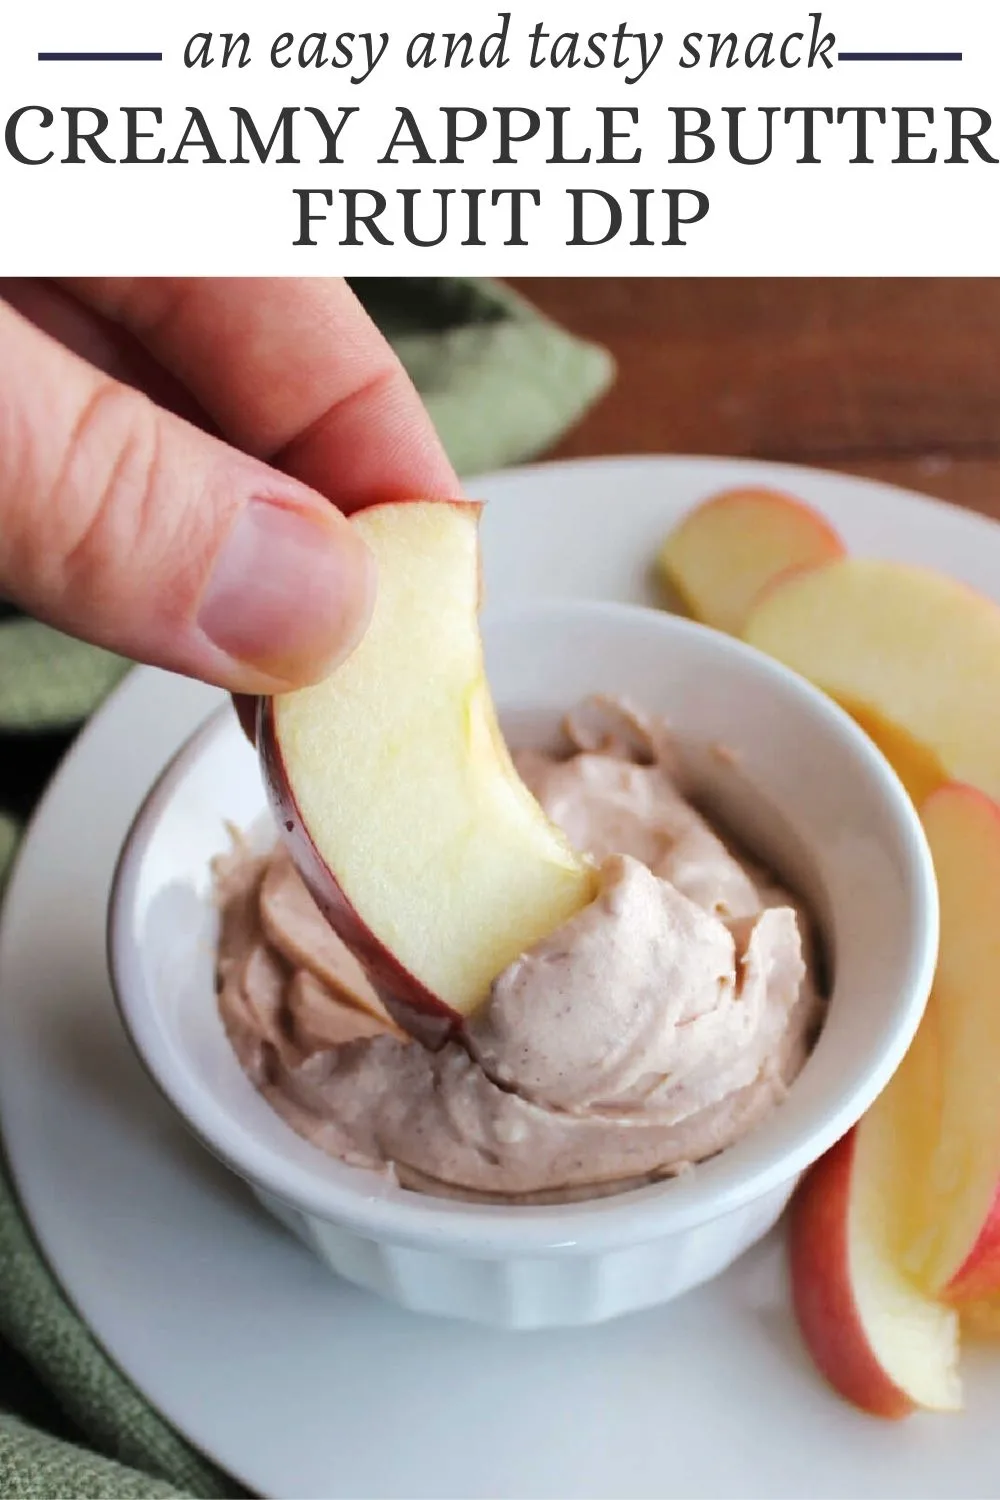 Creamy apple butter fruit dip is perfect for apple slices, graham crackers and more. Luckily it is easy to make and only takes 4 simple ingredients.